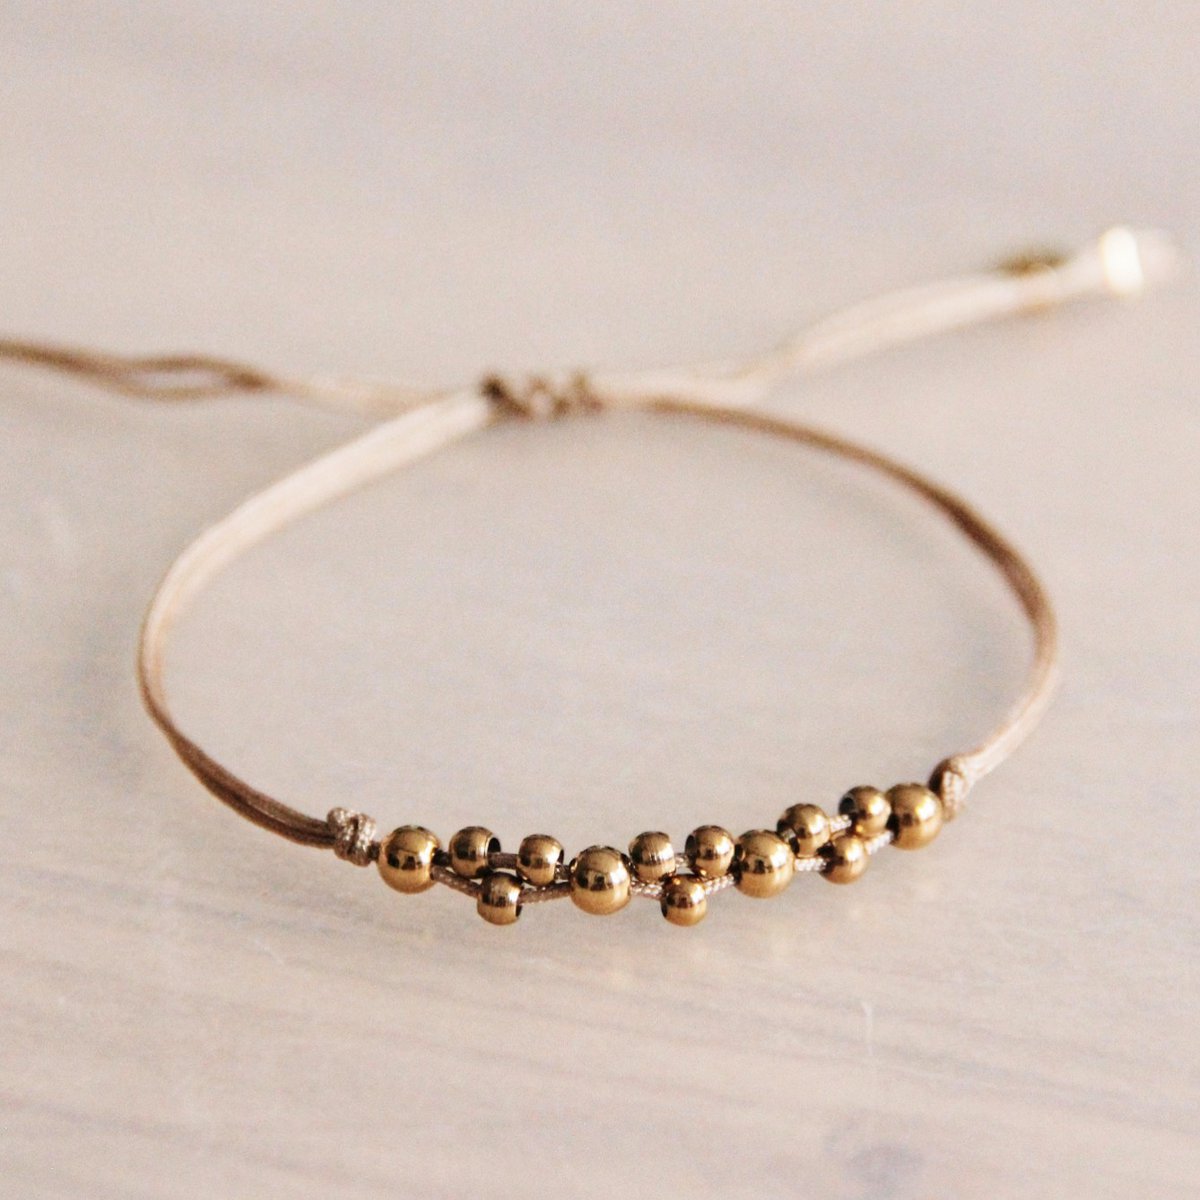 FW107 -  Satin bracelet with gold colored beads - taupe / gold